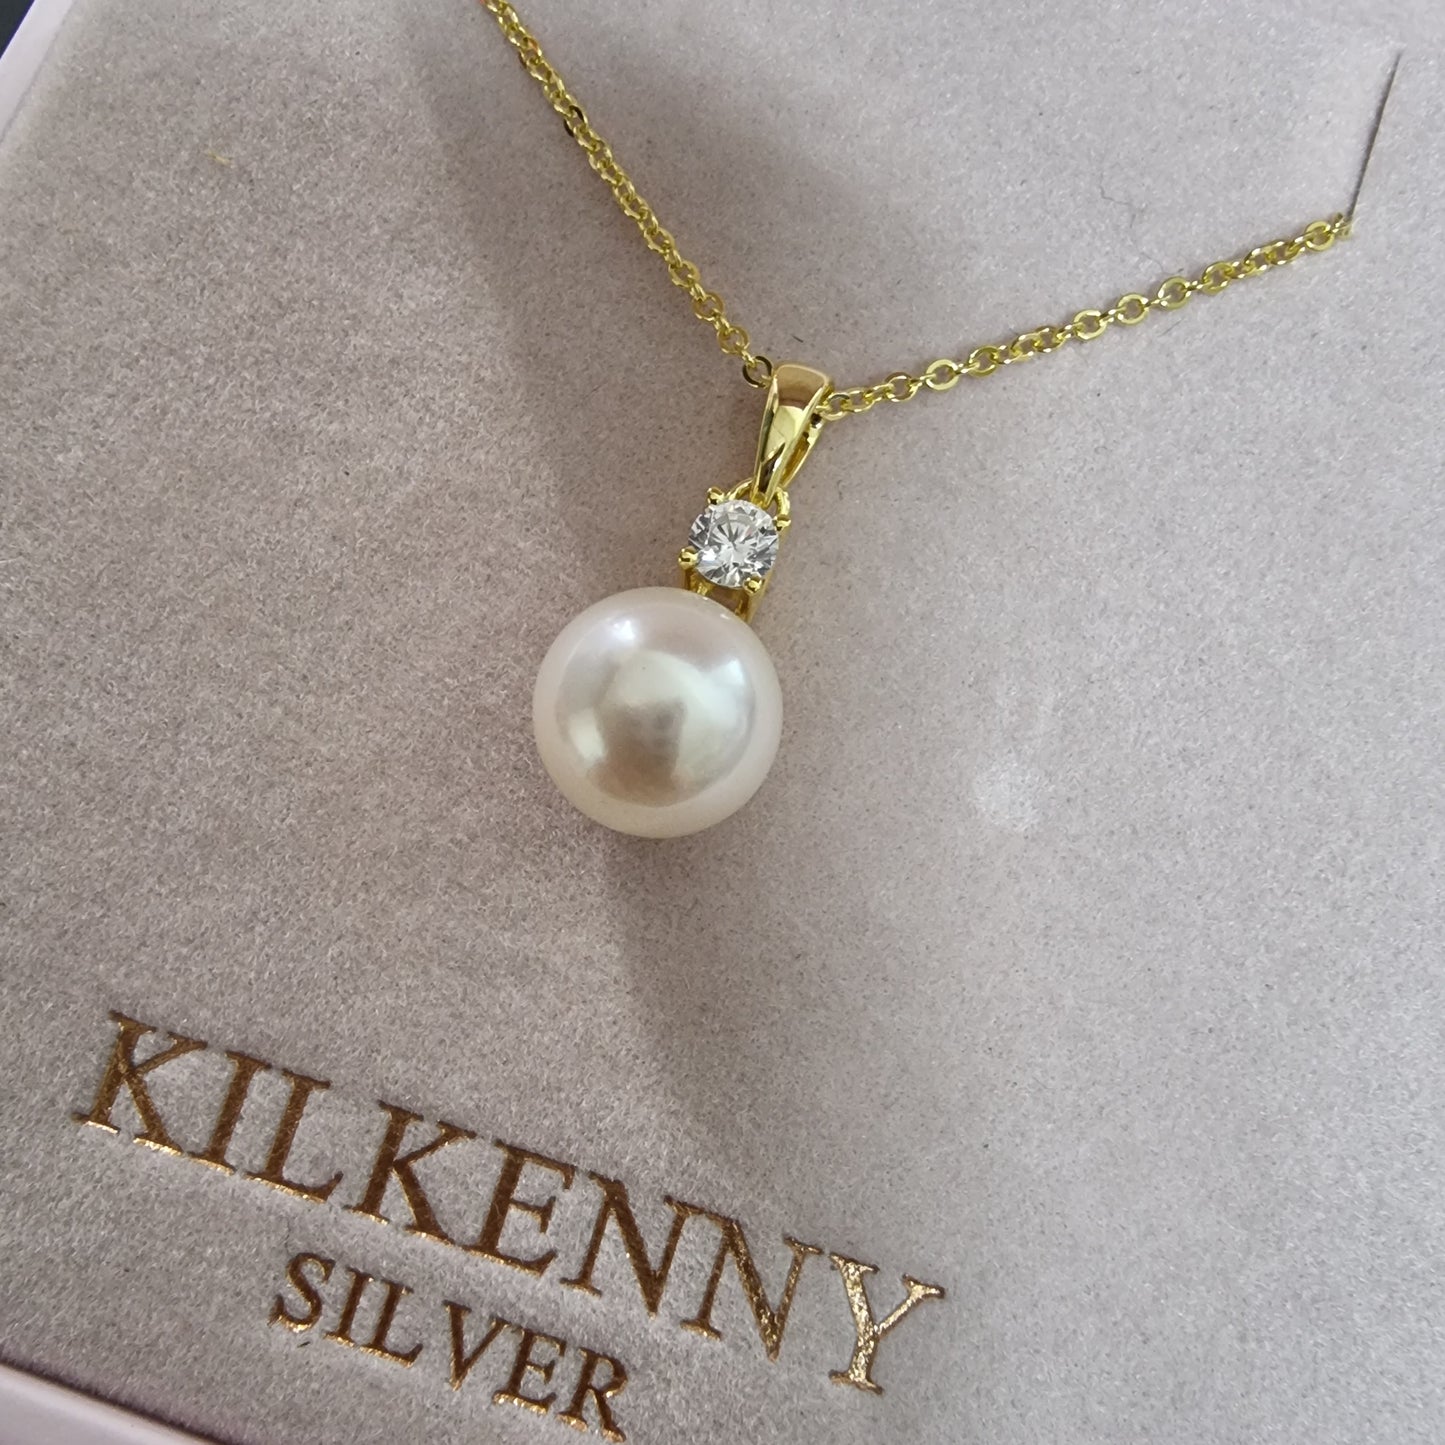 GOLD PEARL DROP NECKLACE with stone